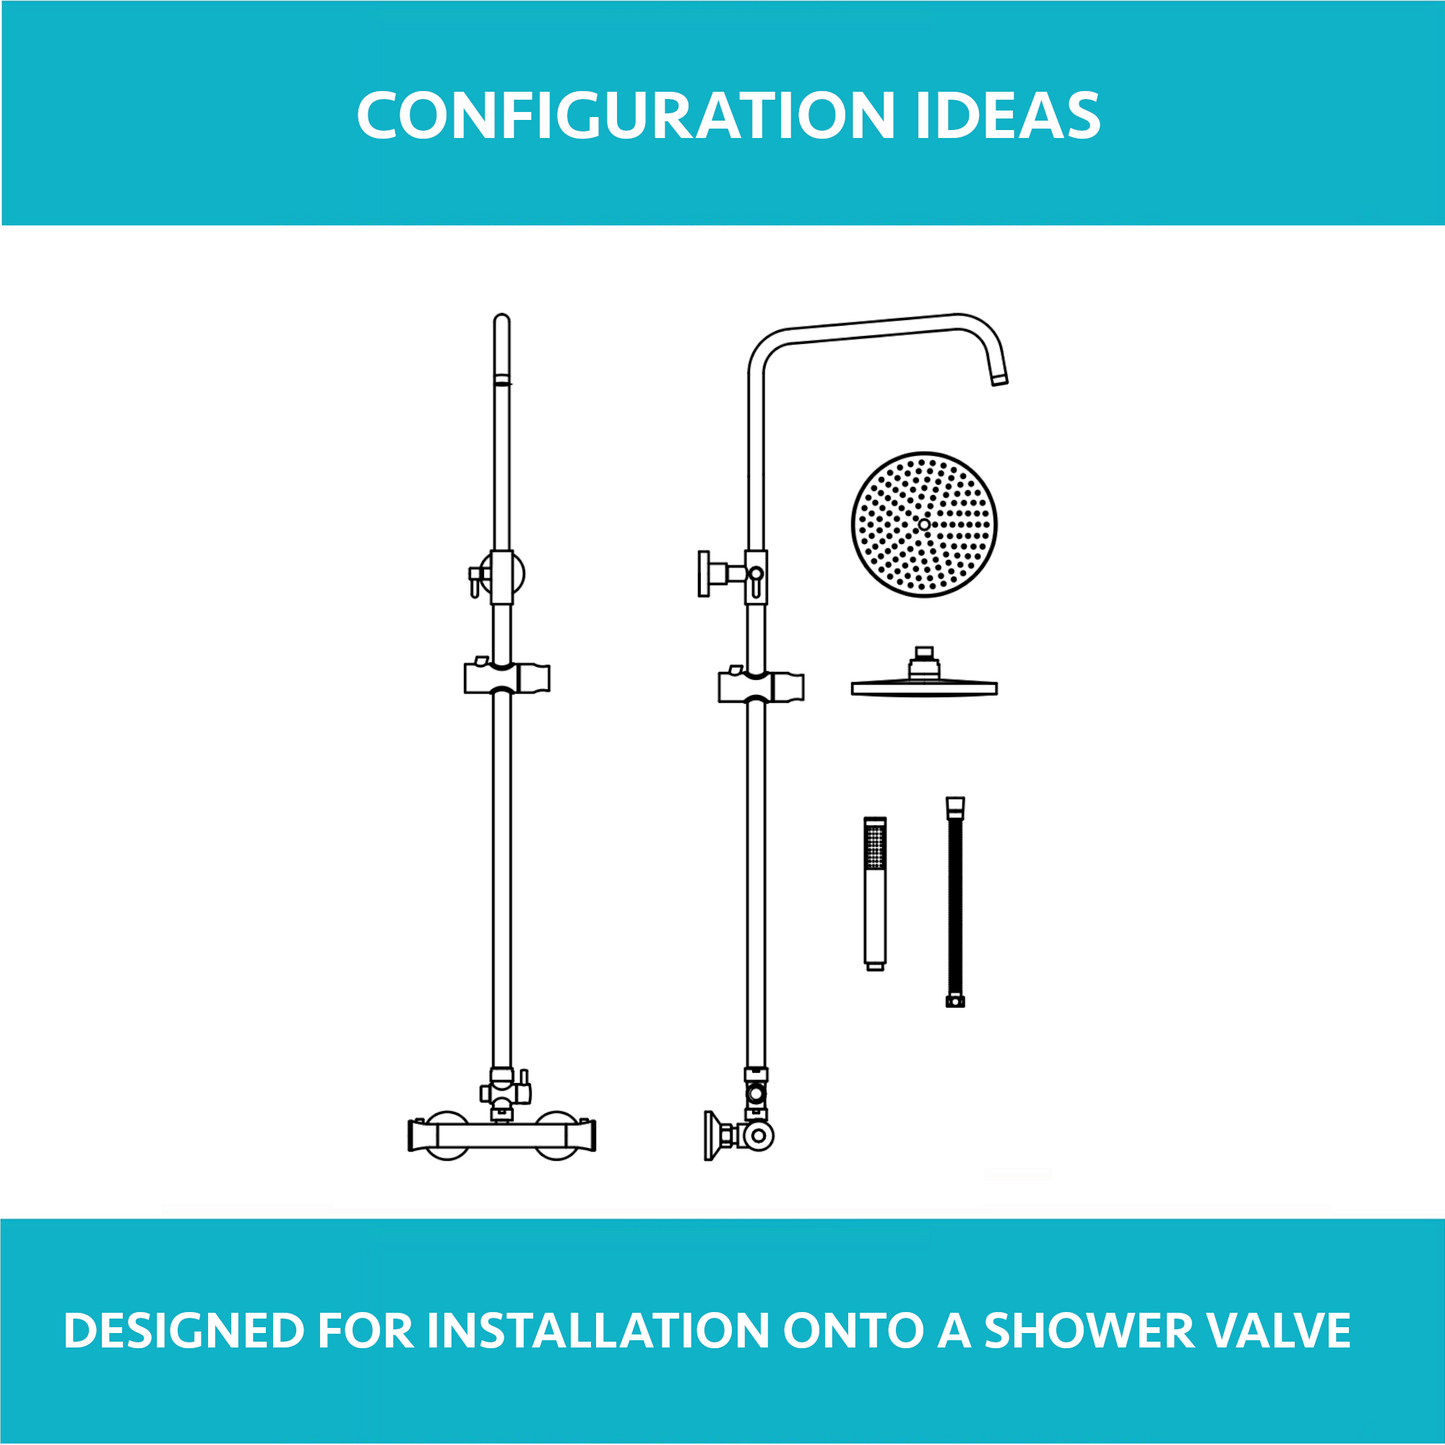 Carre dual shower riser kit adjustable height angled traditional watercan head 200mm, brass ceramic handshower - chrome